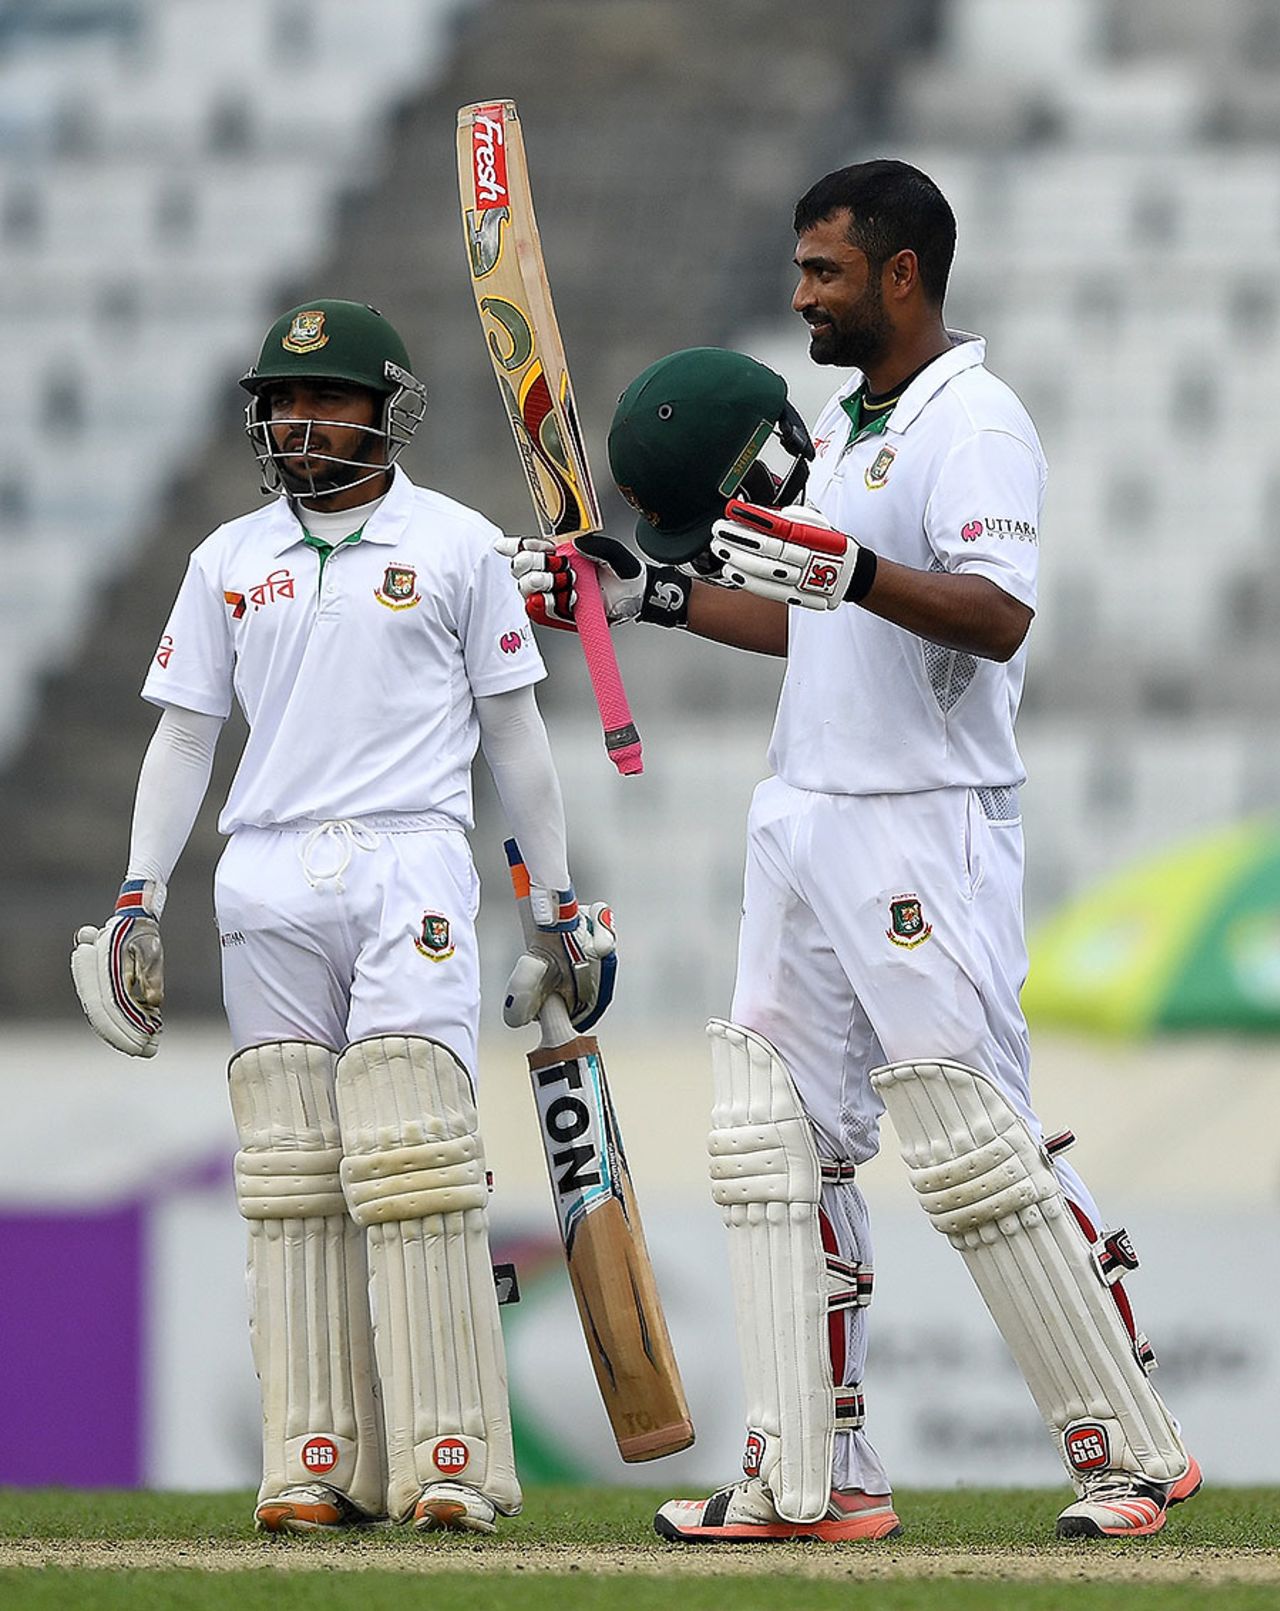 Tamim Iqbal brought up his third Test century against England, Bangladesh v England, 2nd Test, Mirpur, 1st day, October 28, 2016